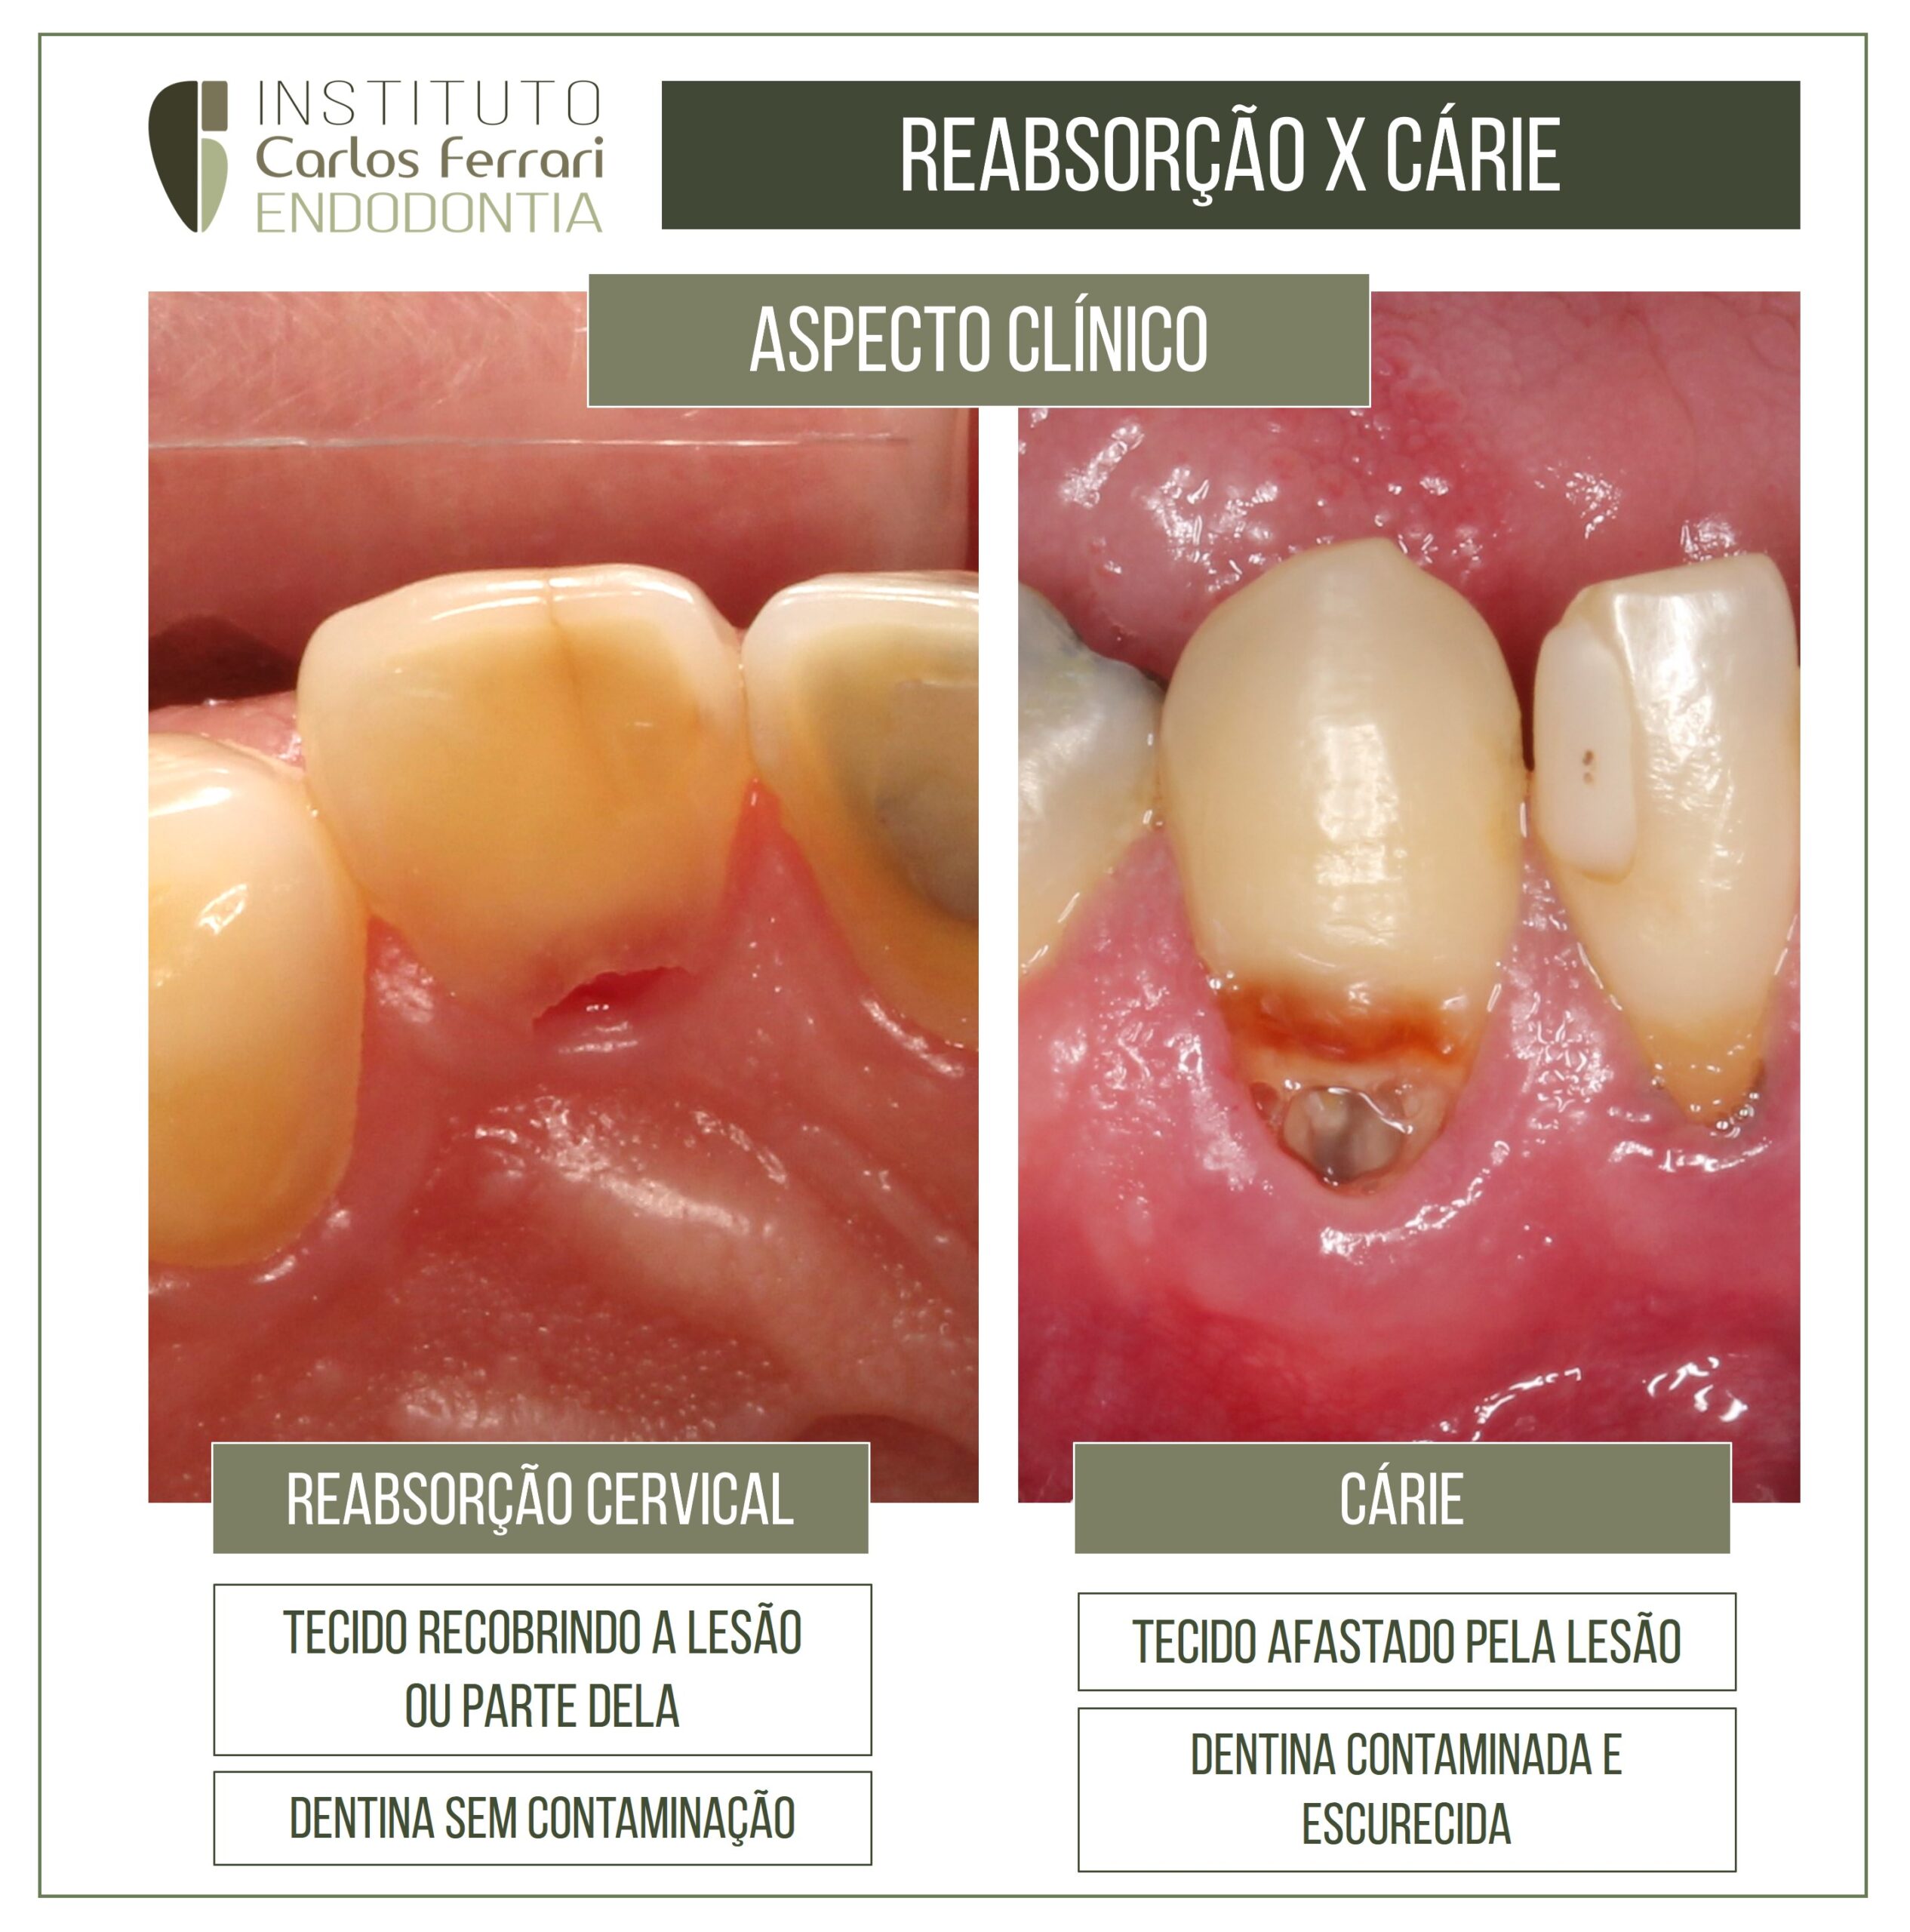 Are you currently viewing Cervical resorption or caries?